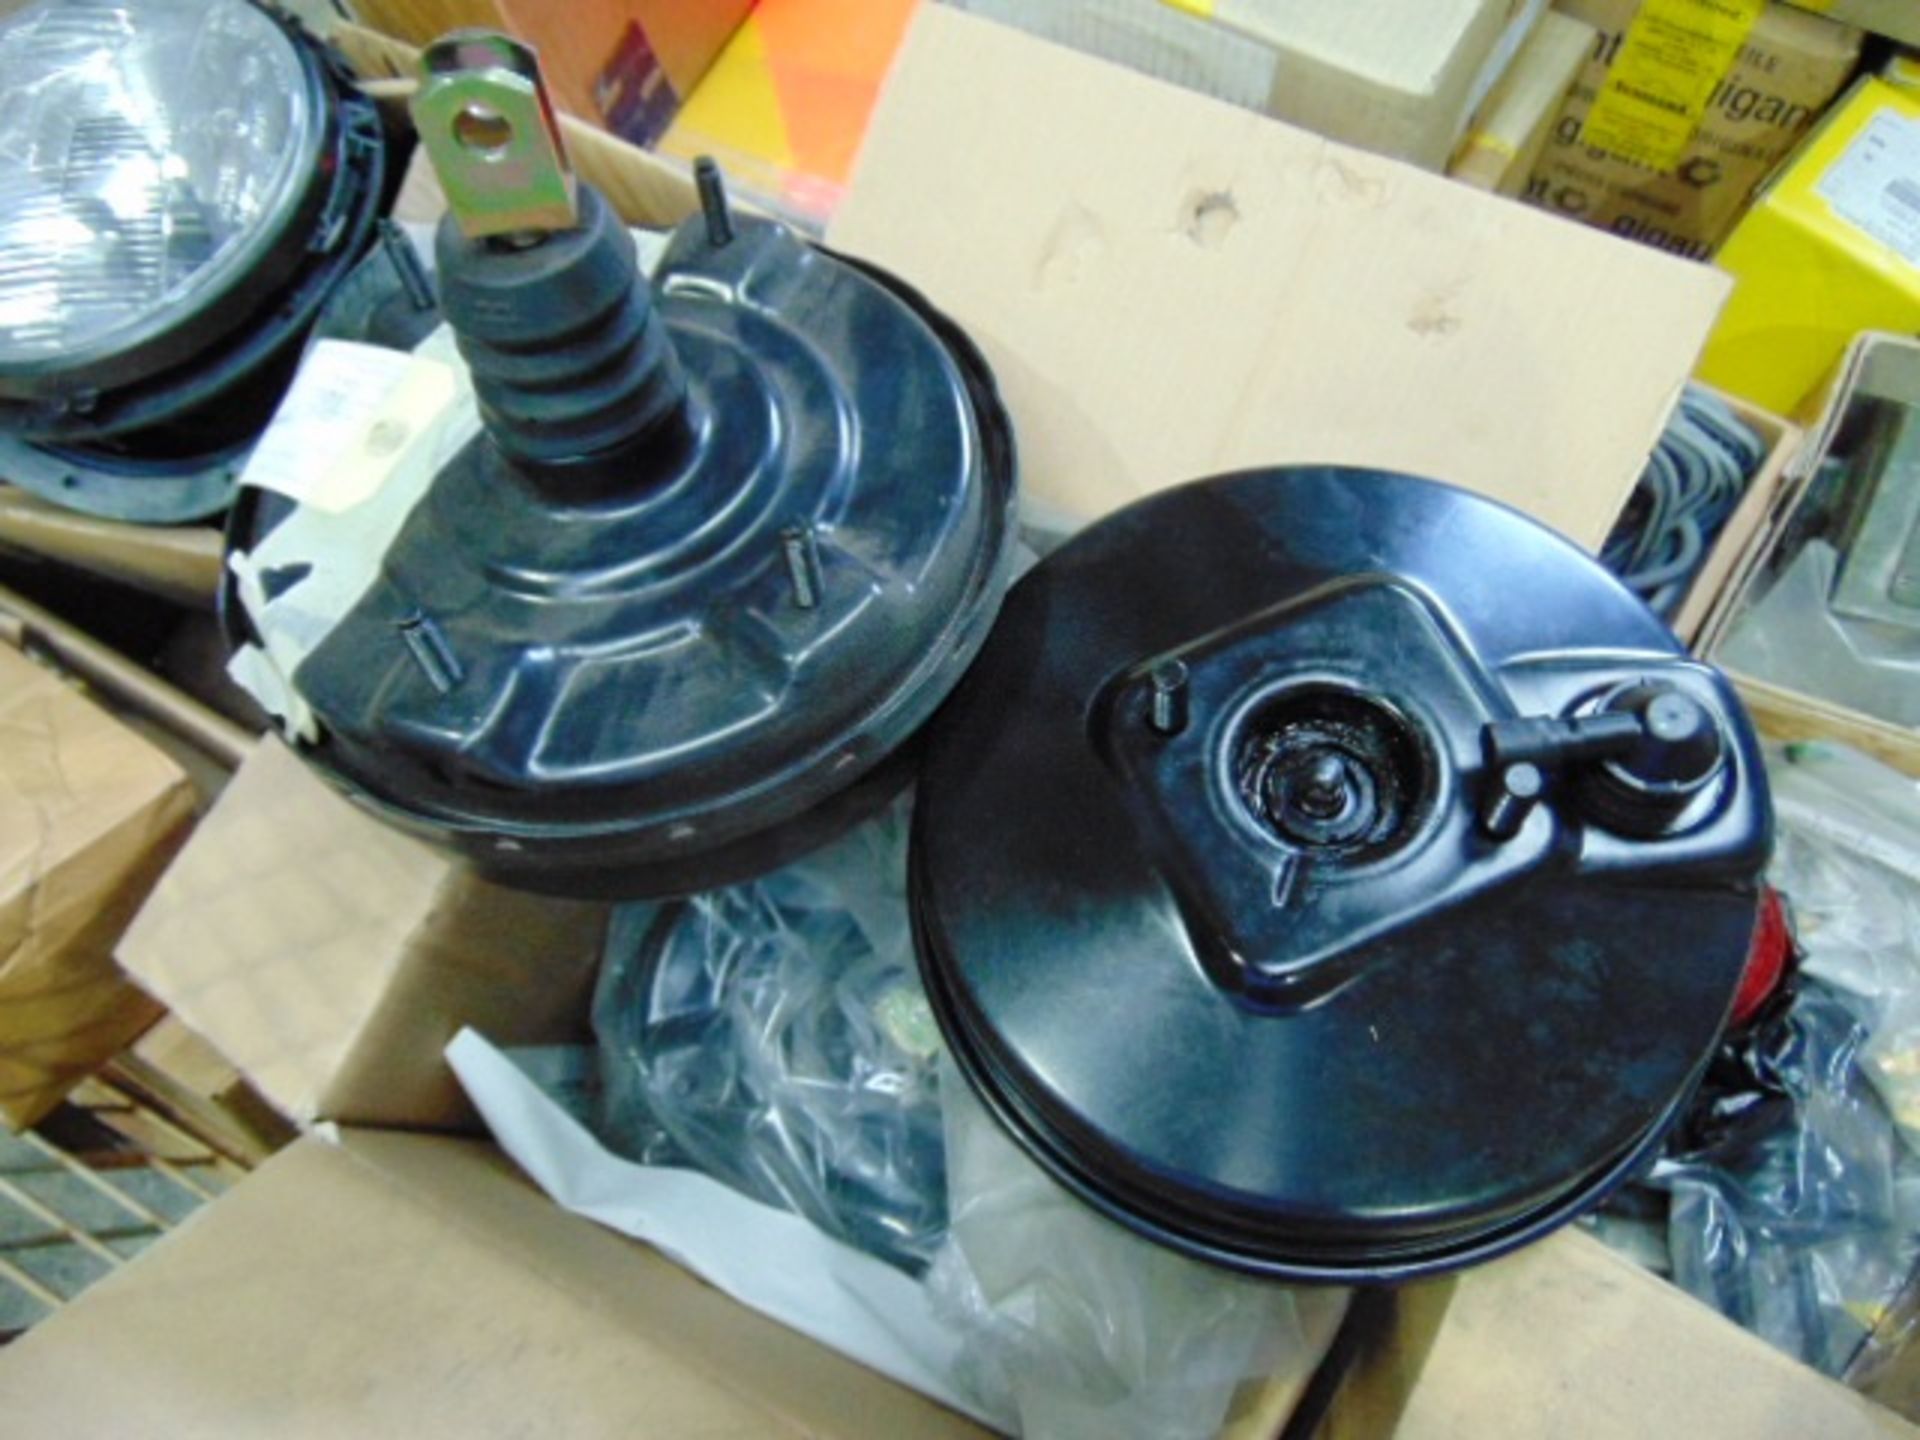 Mixed Stillage of Truck Parts inc Lights, Ball Joints, Filters, Cables etc - Image 12 of 15